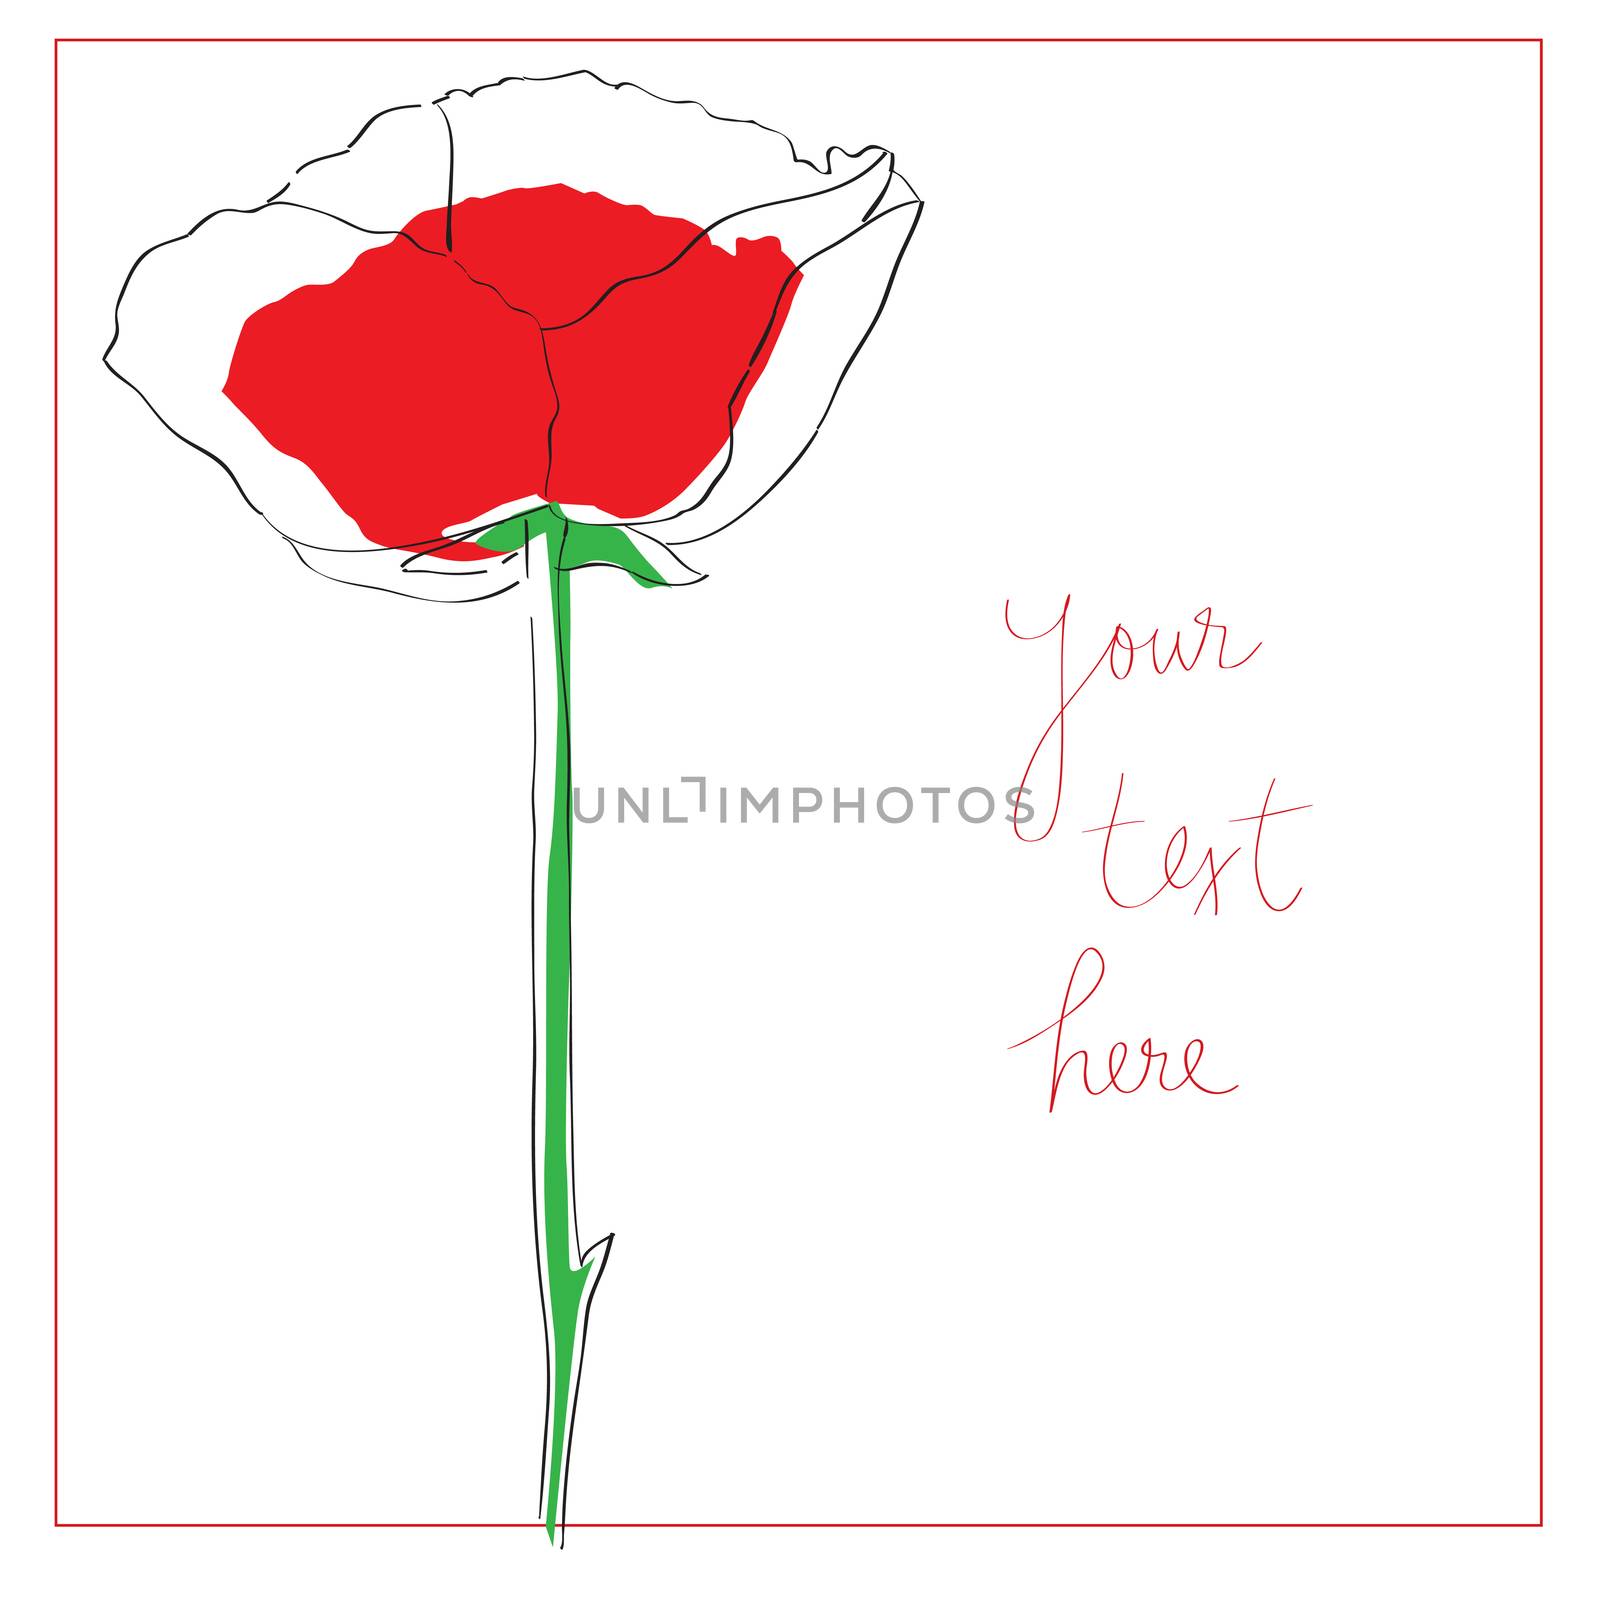 Sparse floral card composition with one poppy, hand drawn illustration isolatded on white